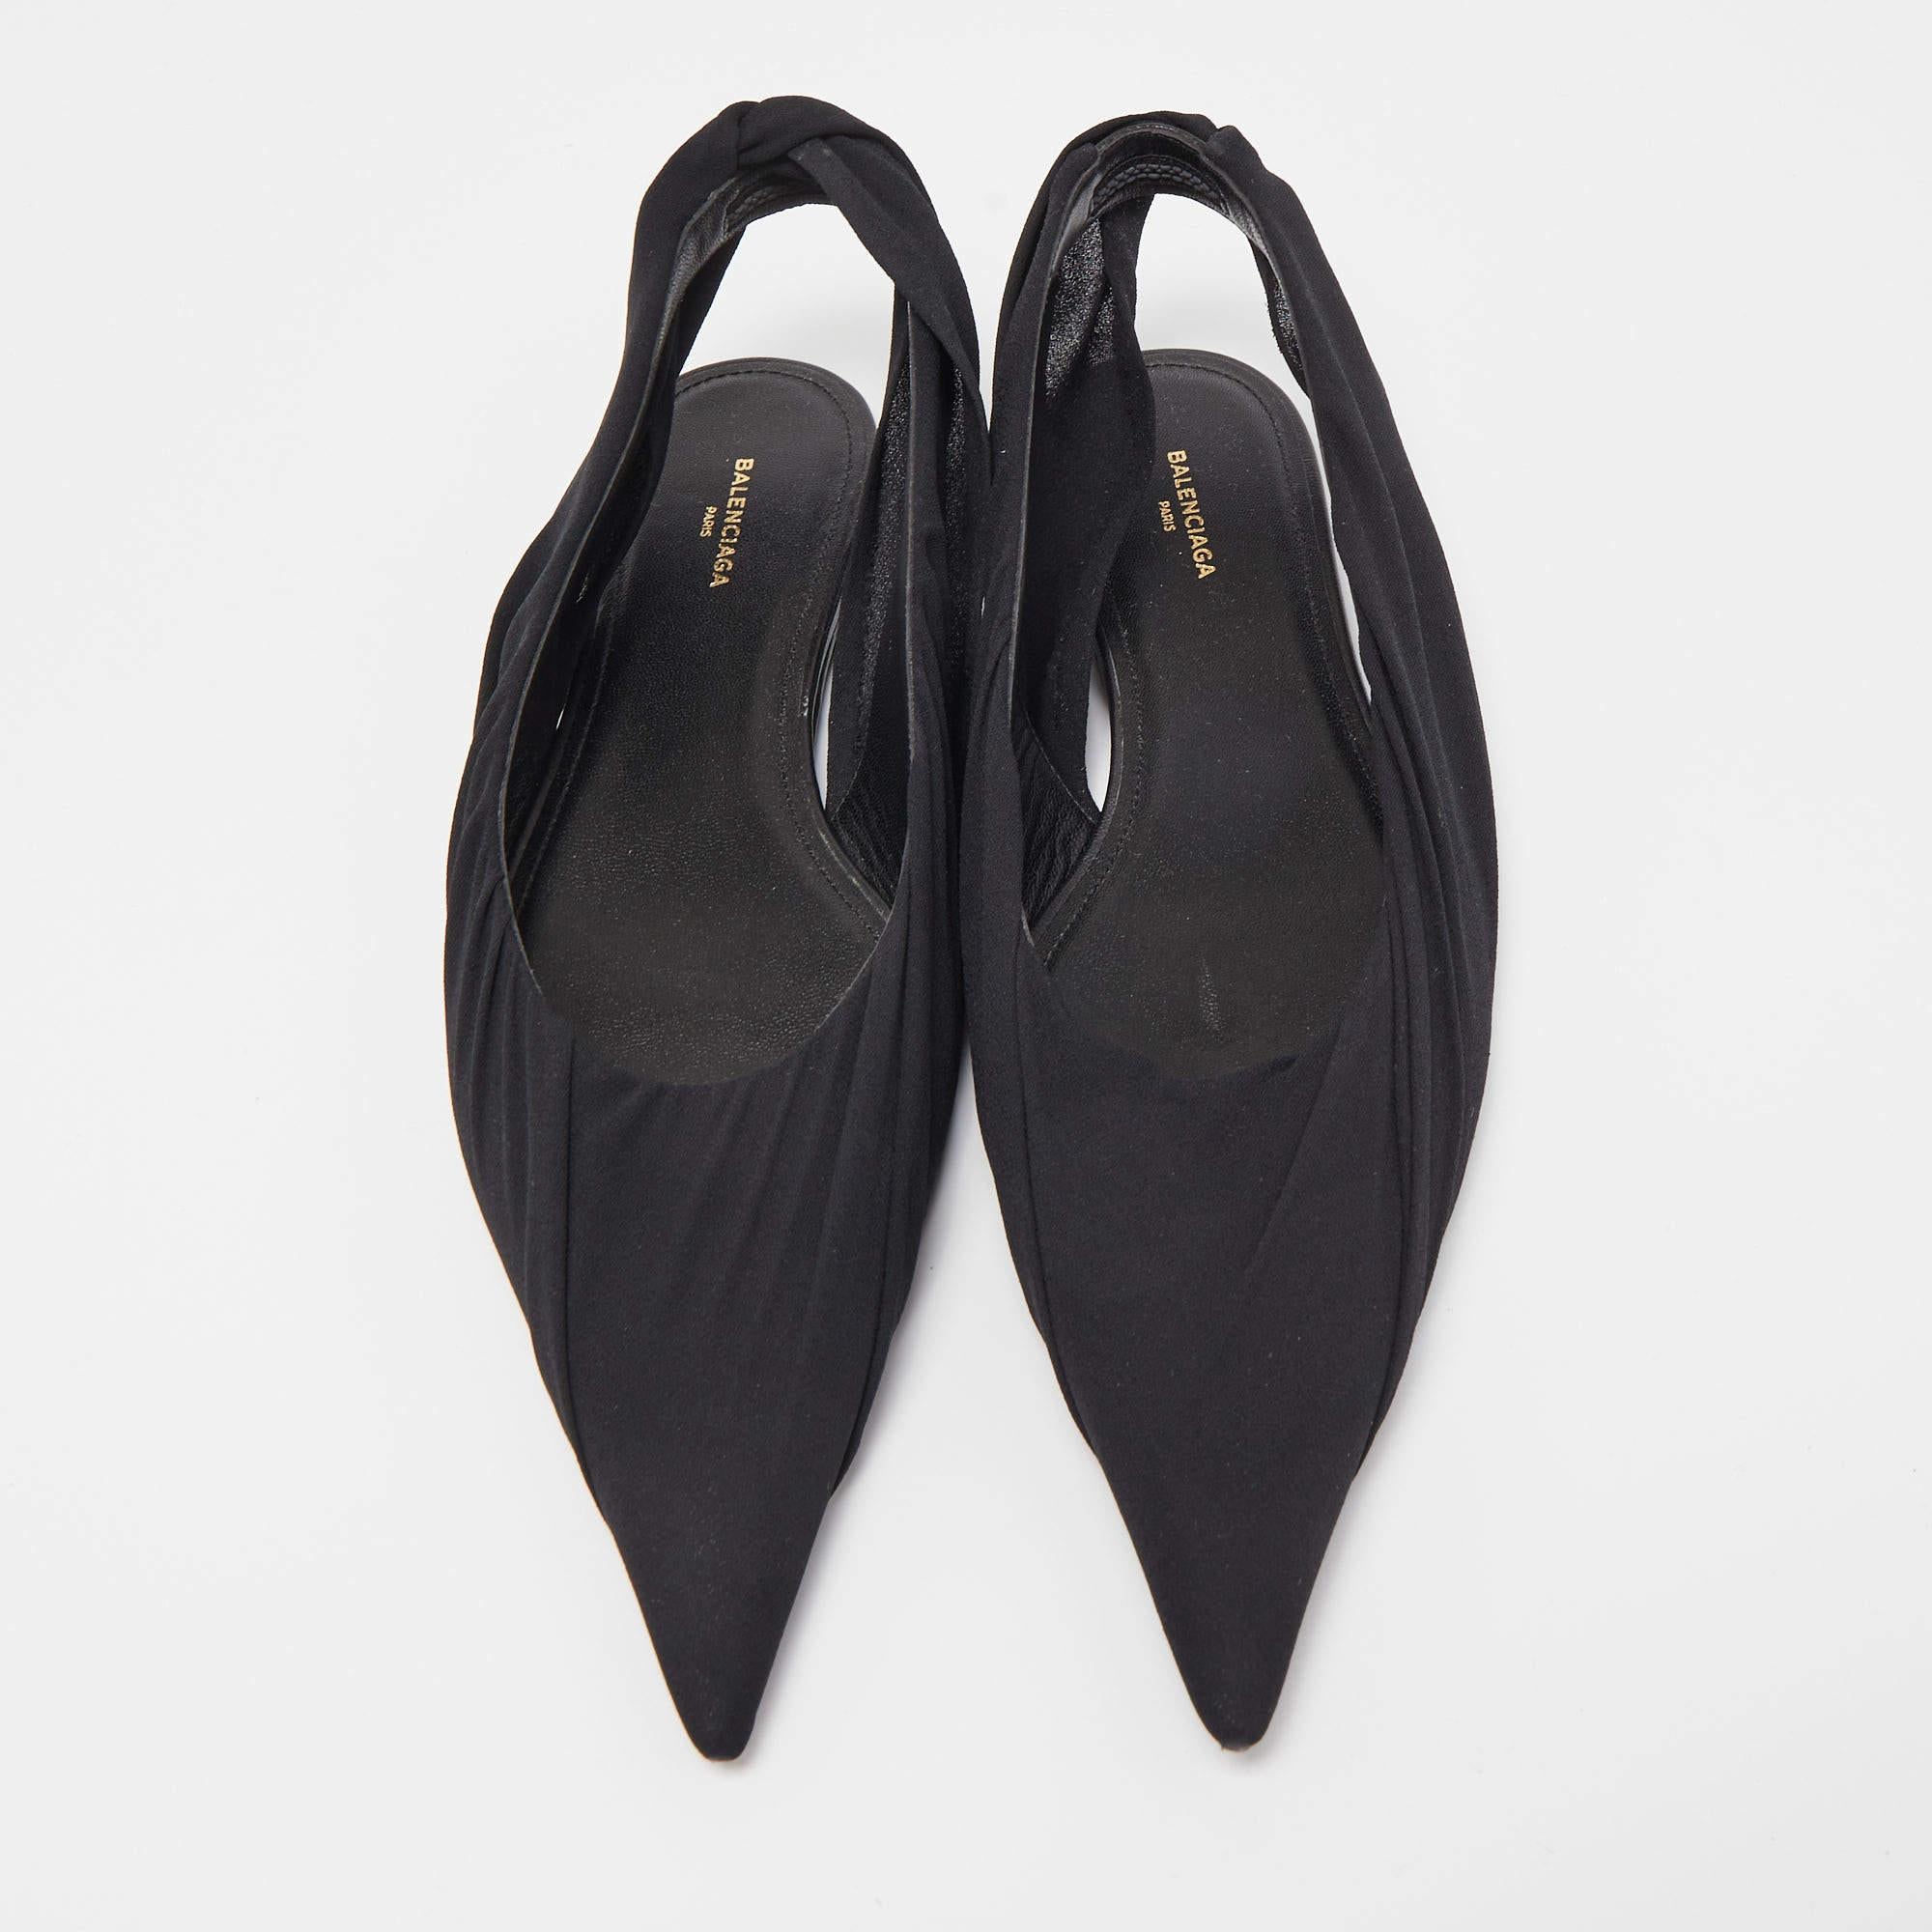 The Balenciaga flats are elegant and versatile footwear. Crafted from sleek black fabric, they feature a pointed toe and a slender slingback strap for a chic, minimalist look. These flats offer comfort and style, making them a perfect choice for